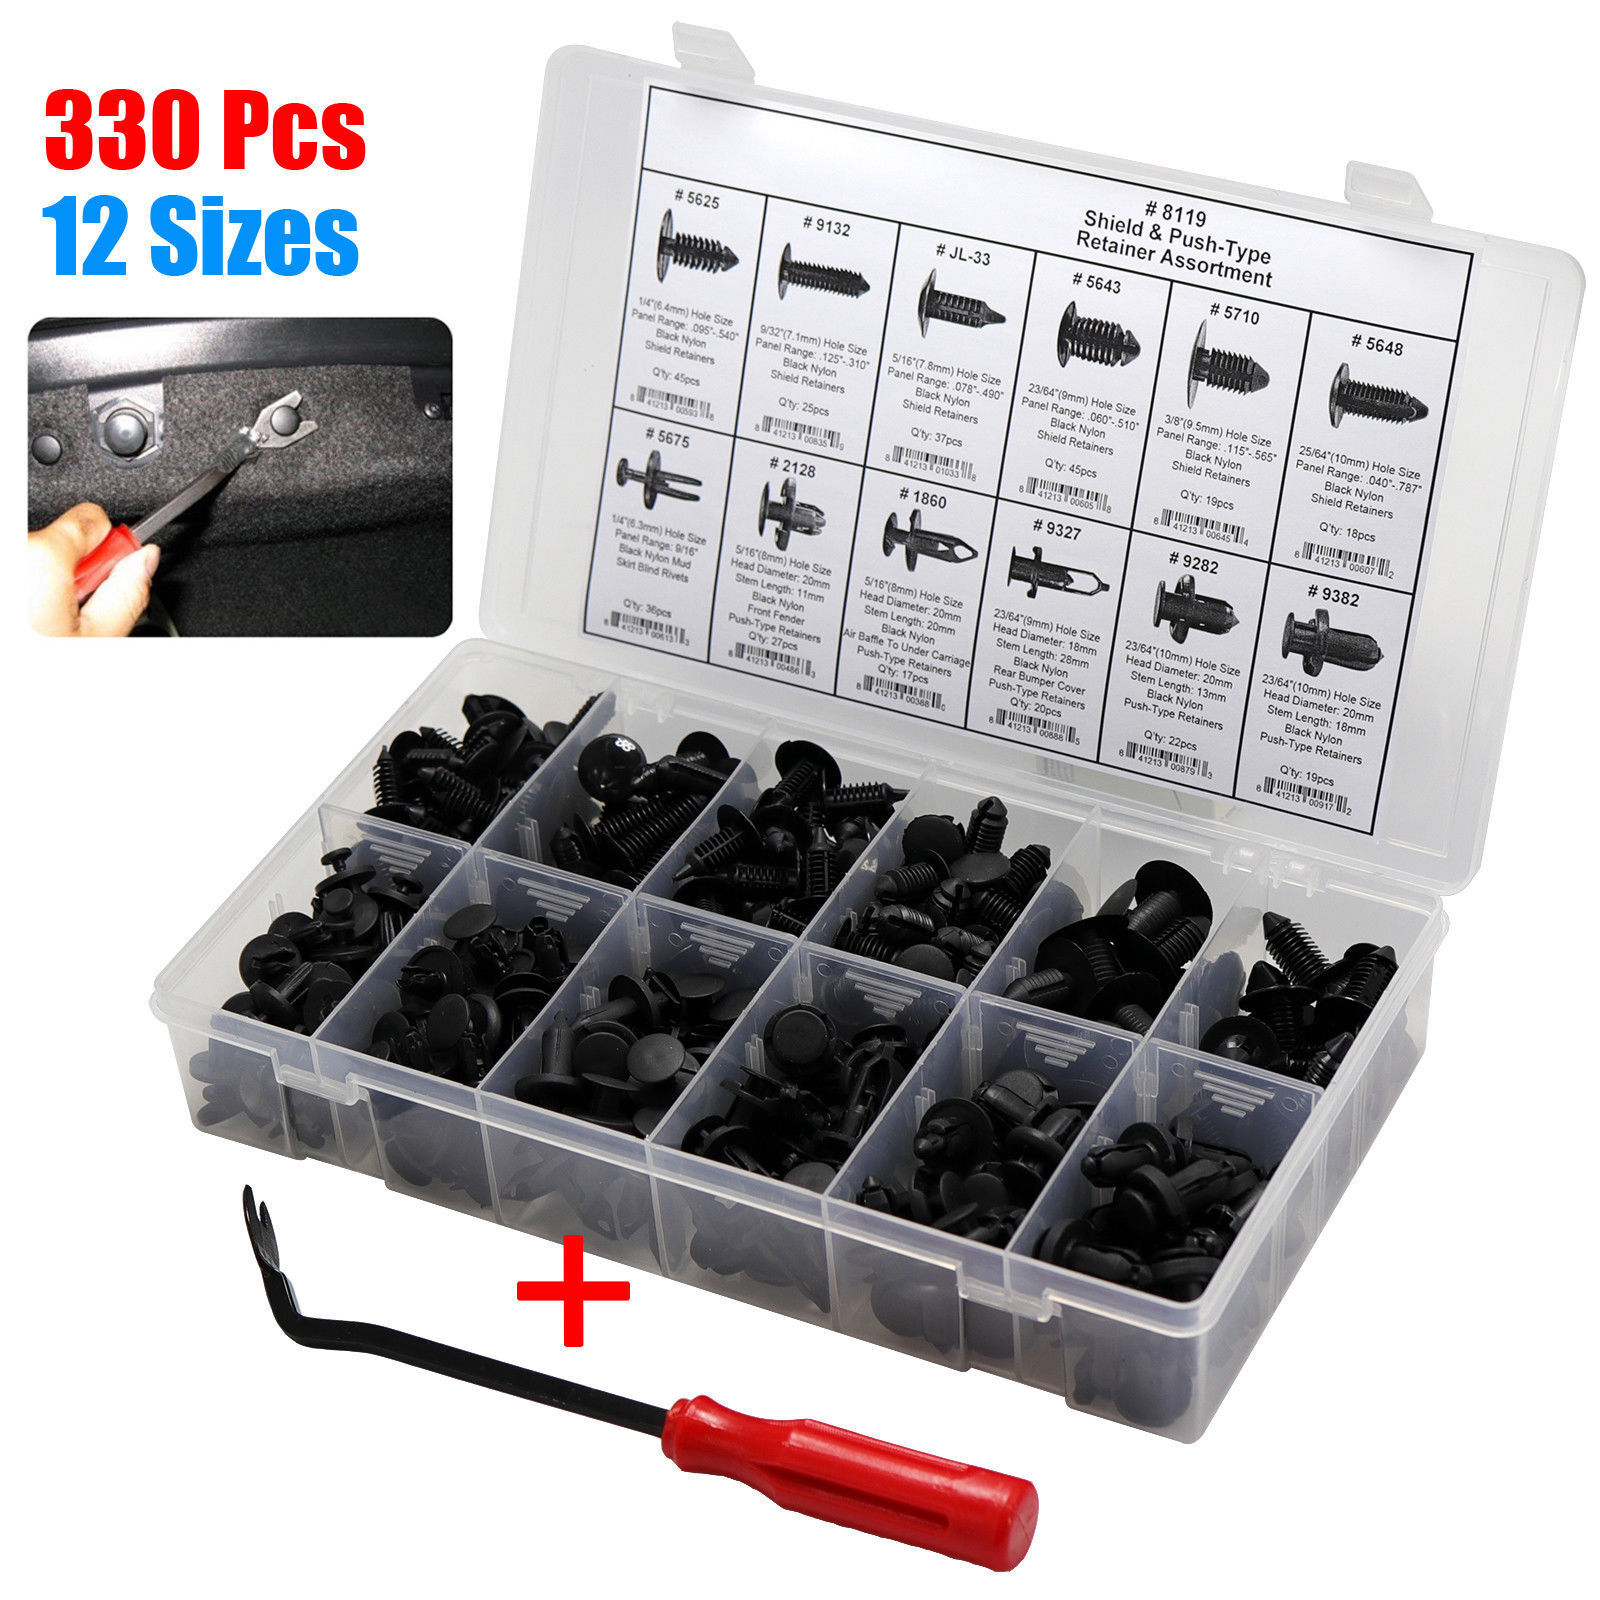 330 Clips Automotive Push Pins Retainer Assortment Fits For GM Ford Toyota Honda